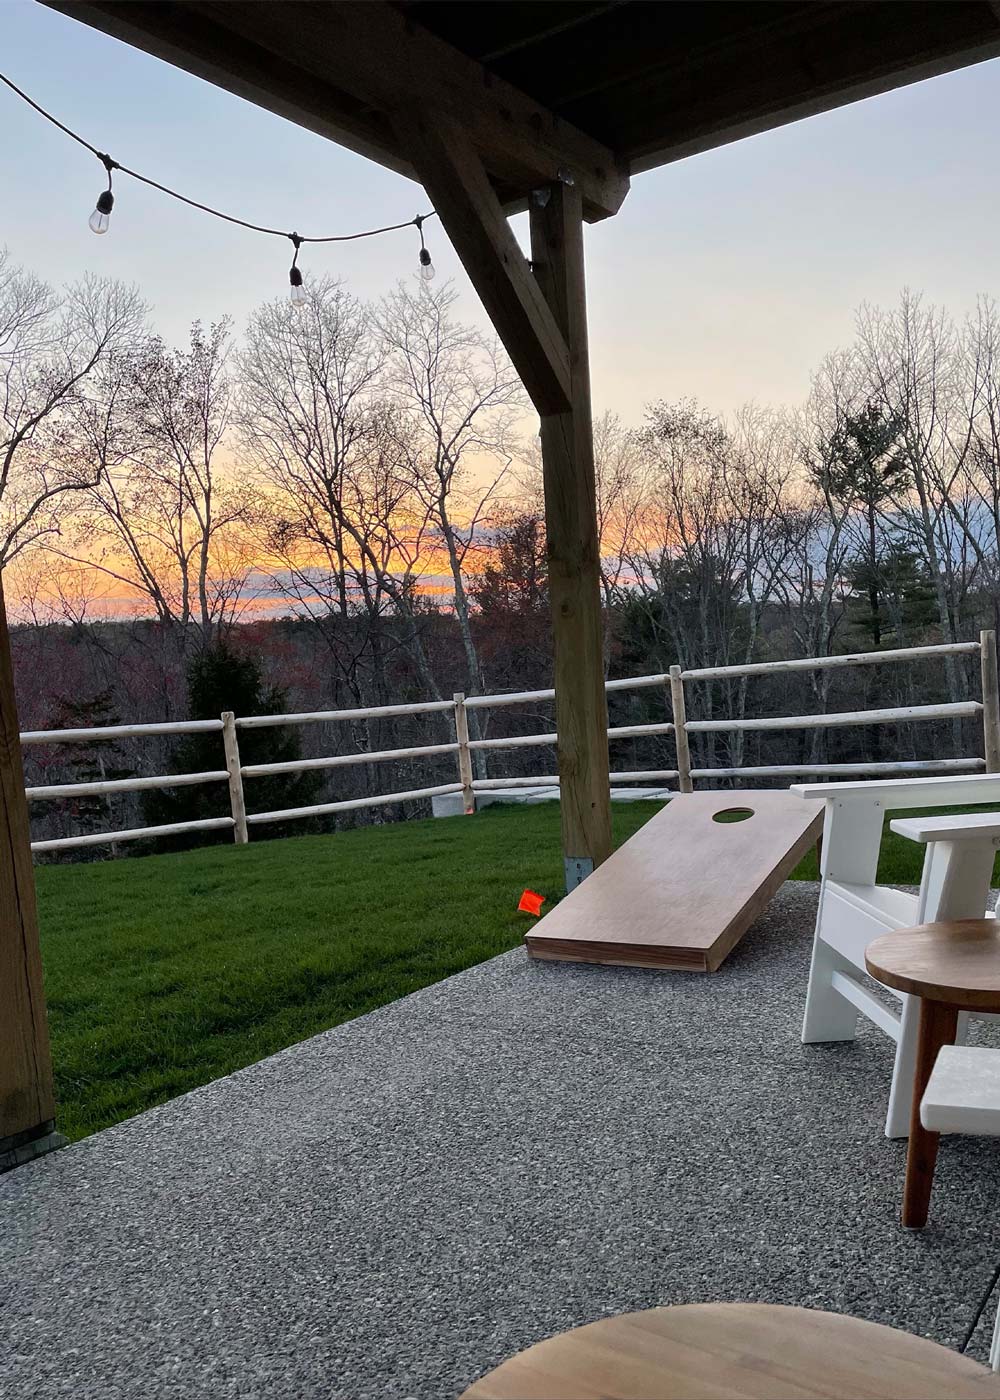 A backyard patio with white lawn chairs and wooden corn hole game, with a sunset in the background